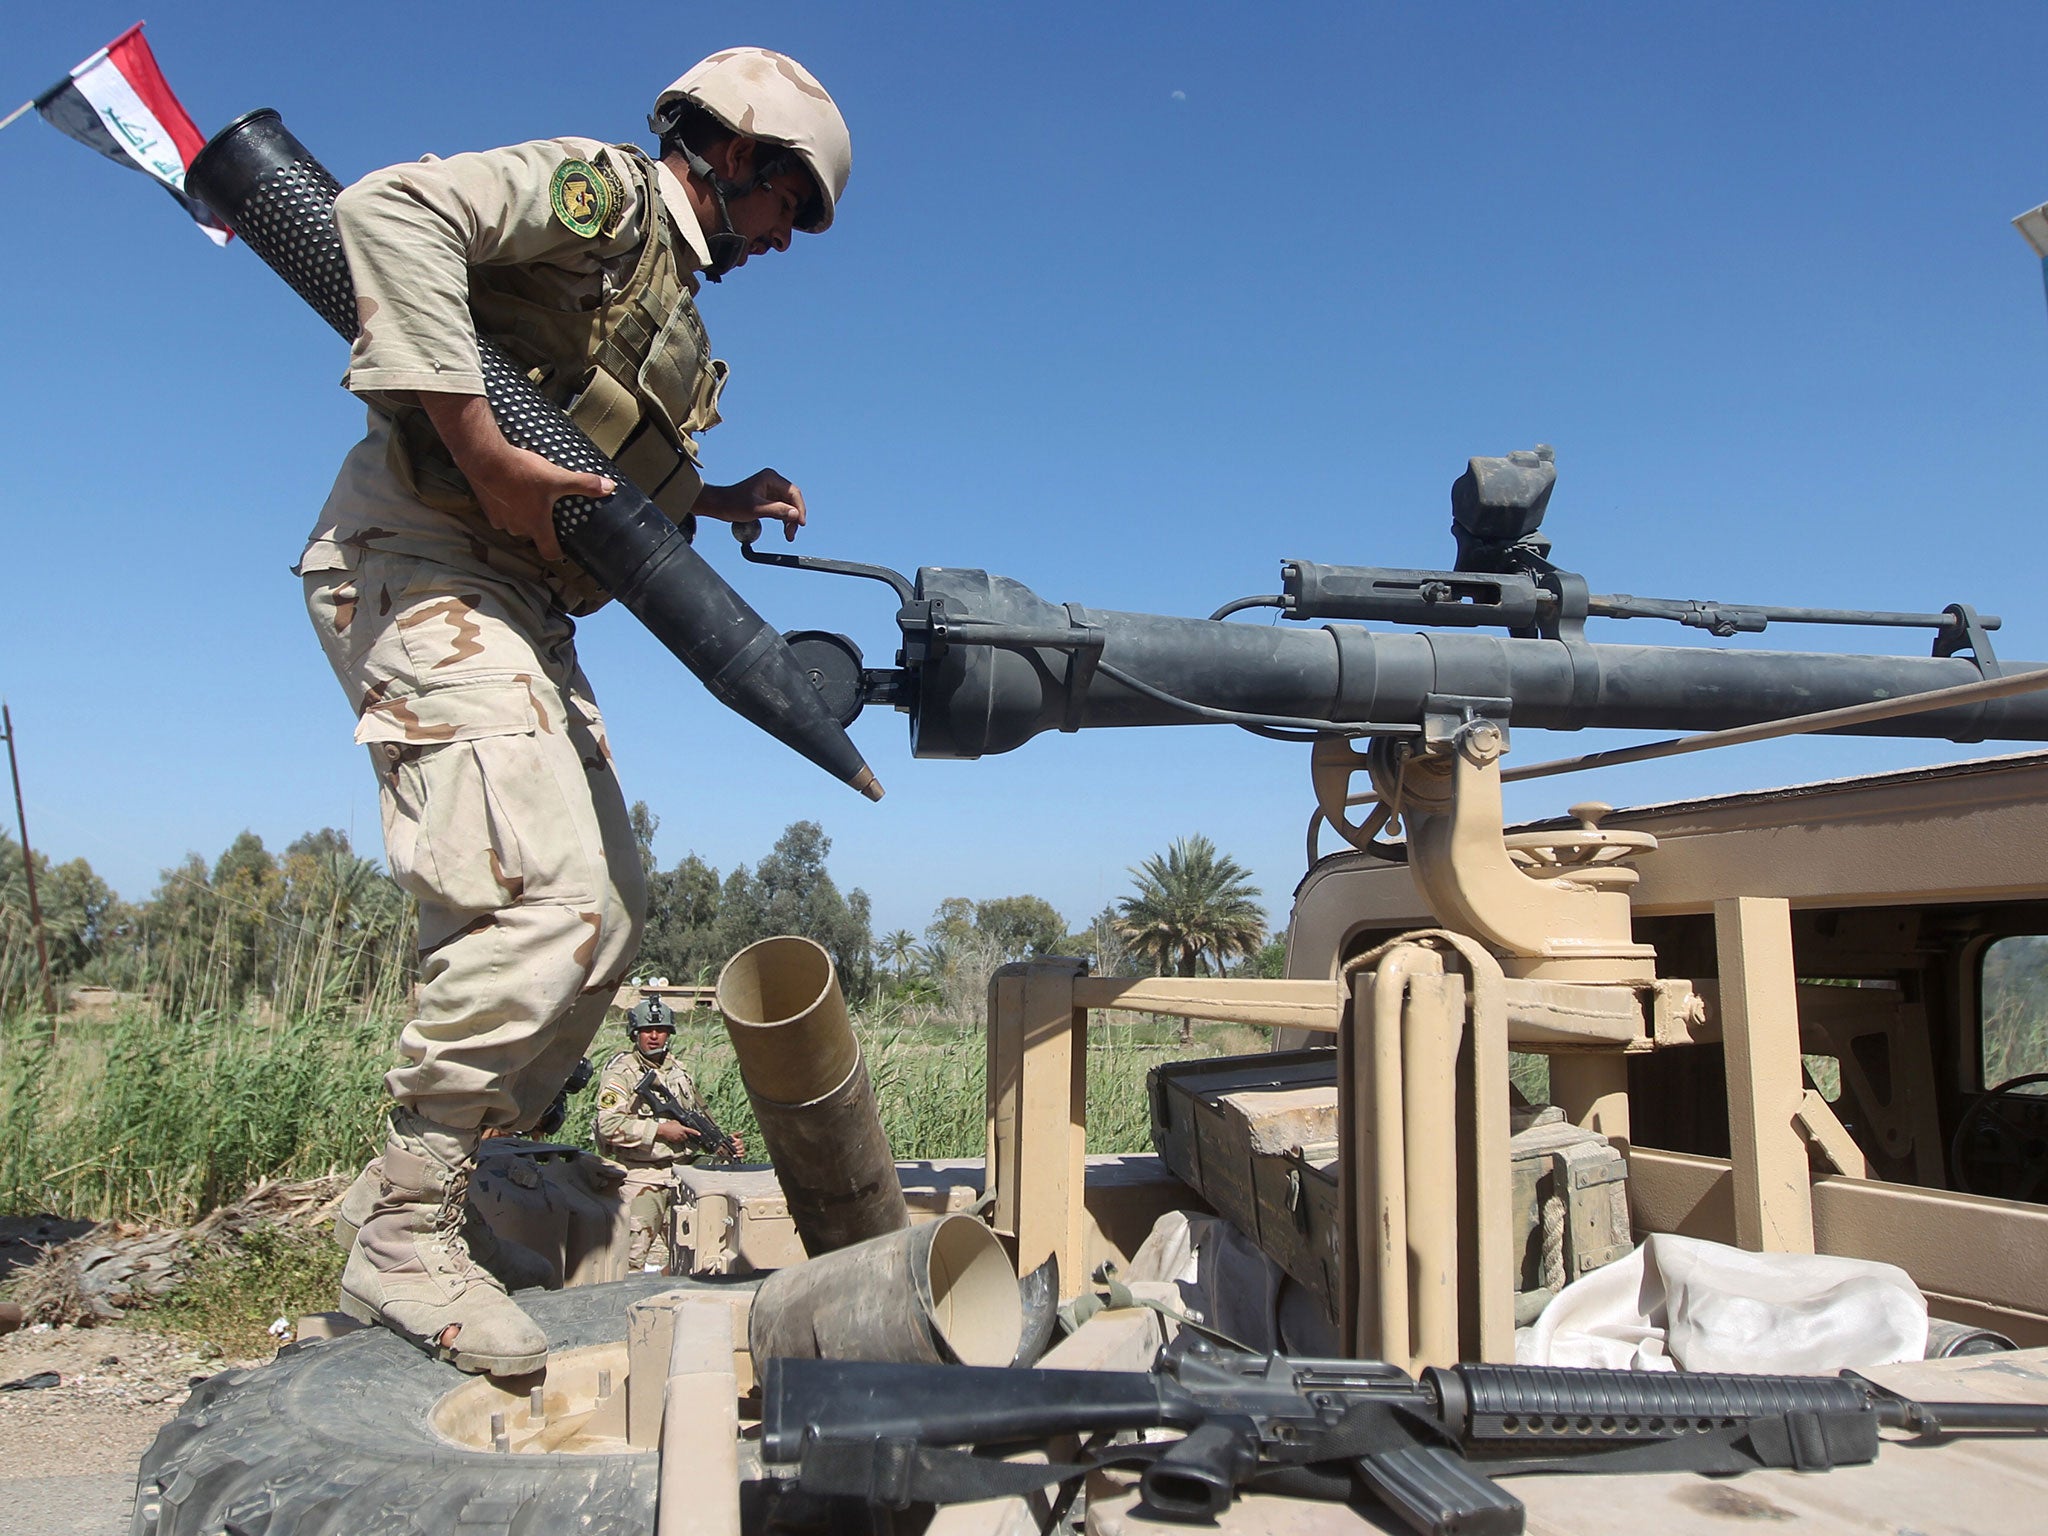 Iraqi forces prepare to fire artillery towards Isis group positions in the Garma district, west of Baghdad, in April 2015.